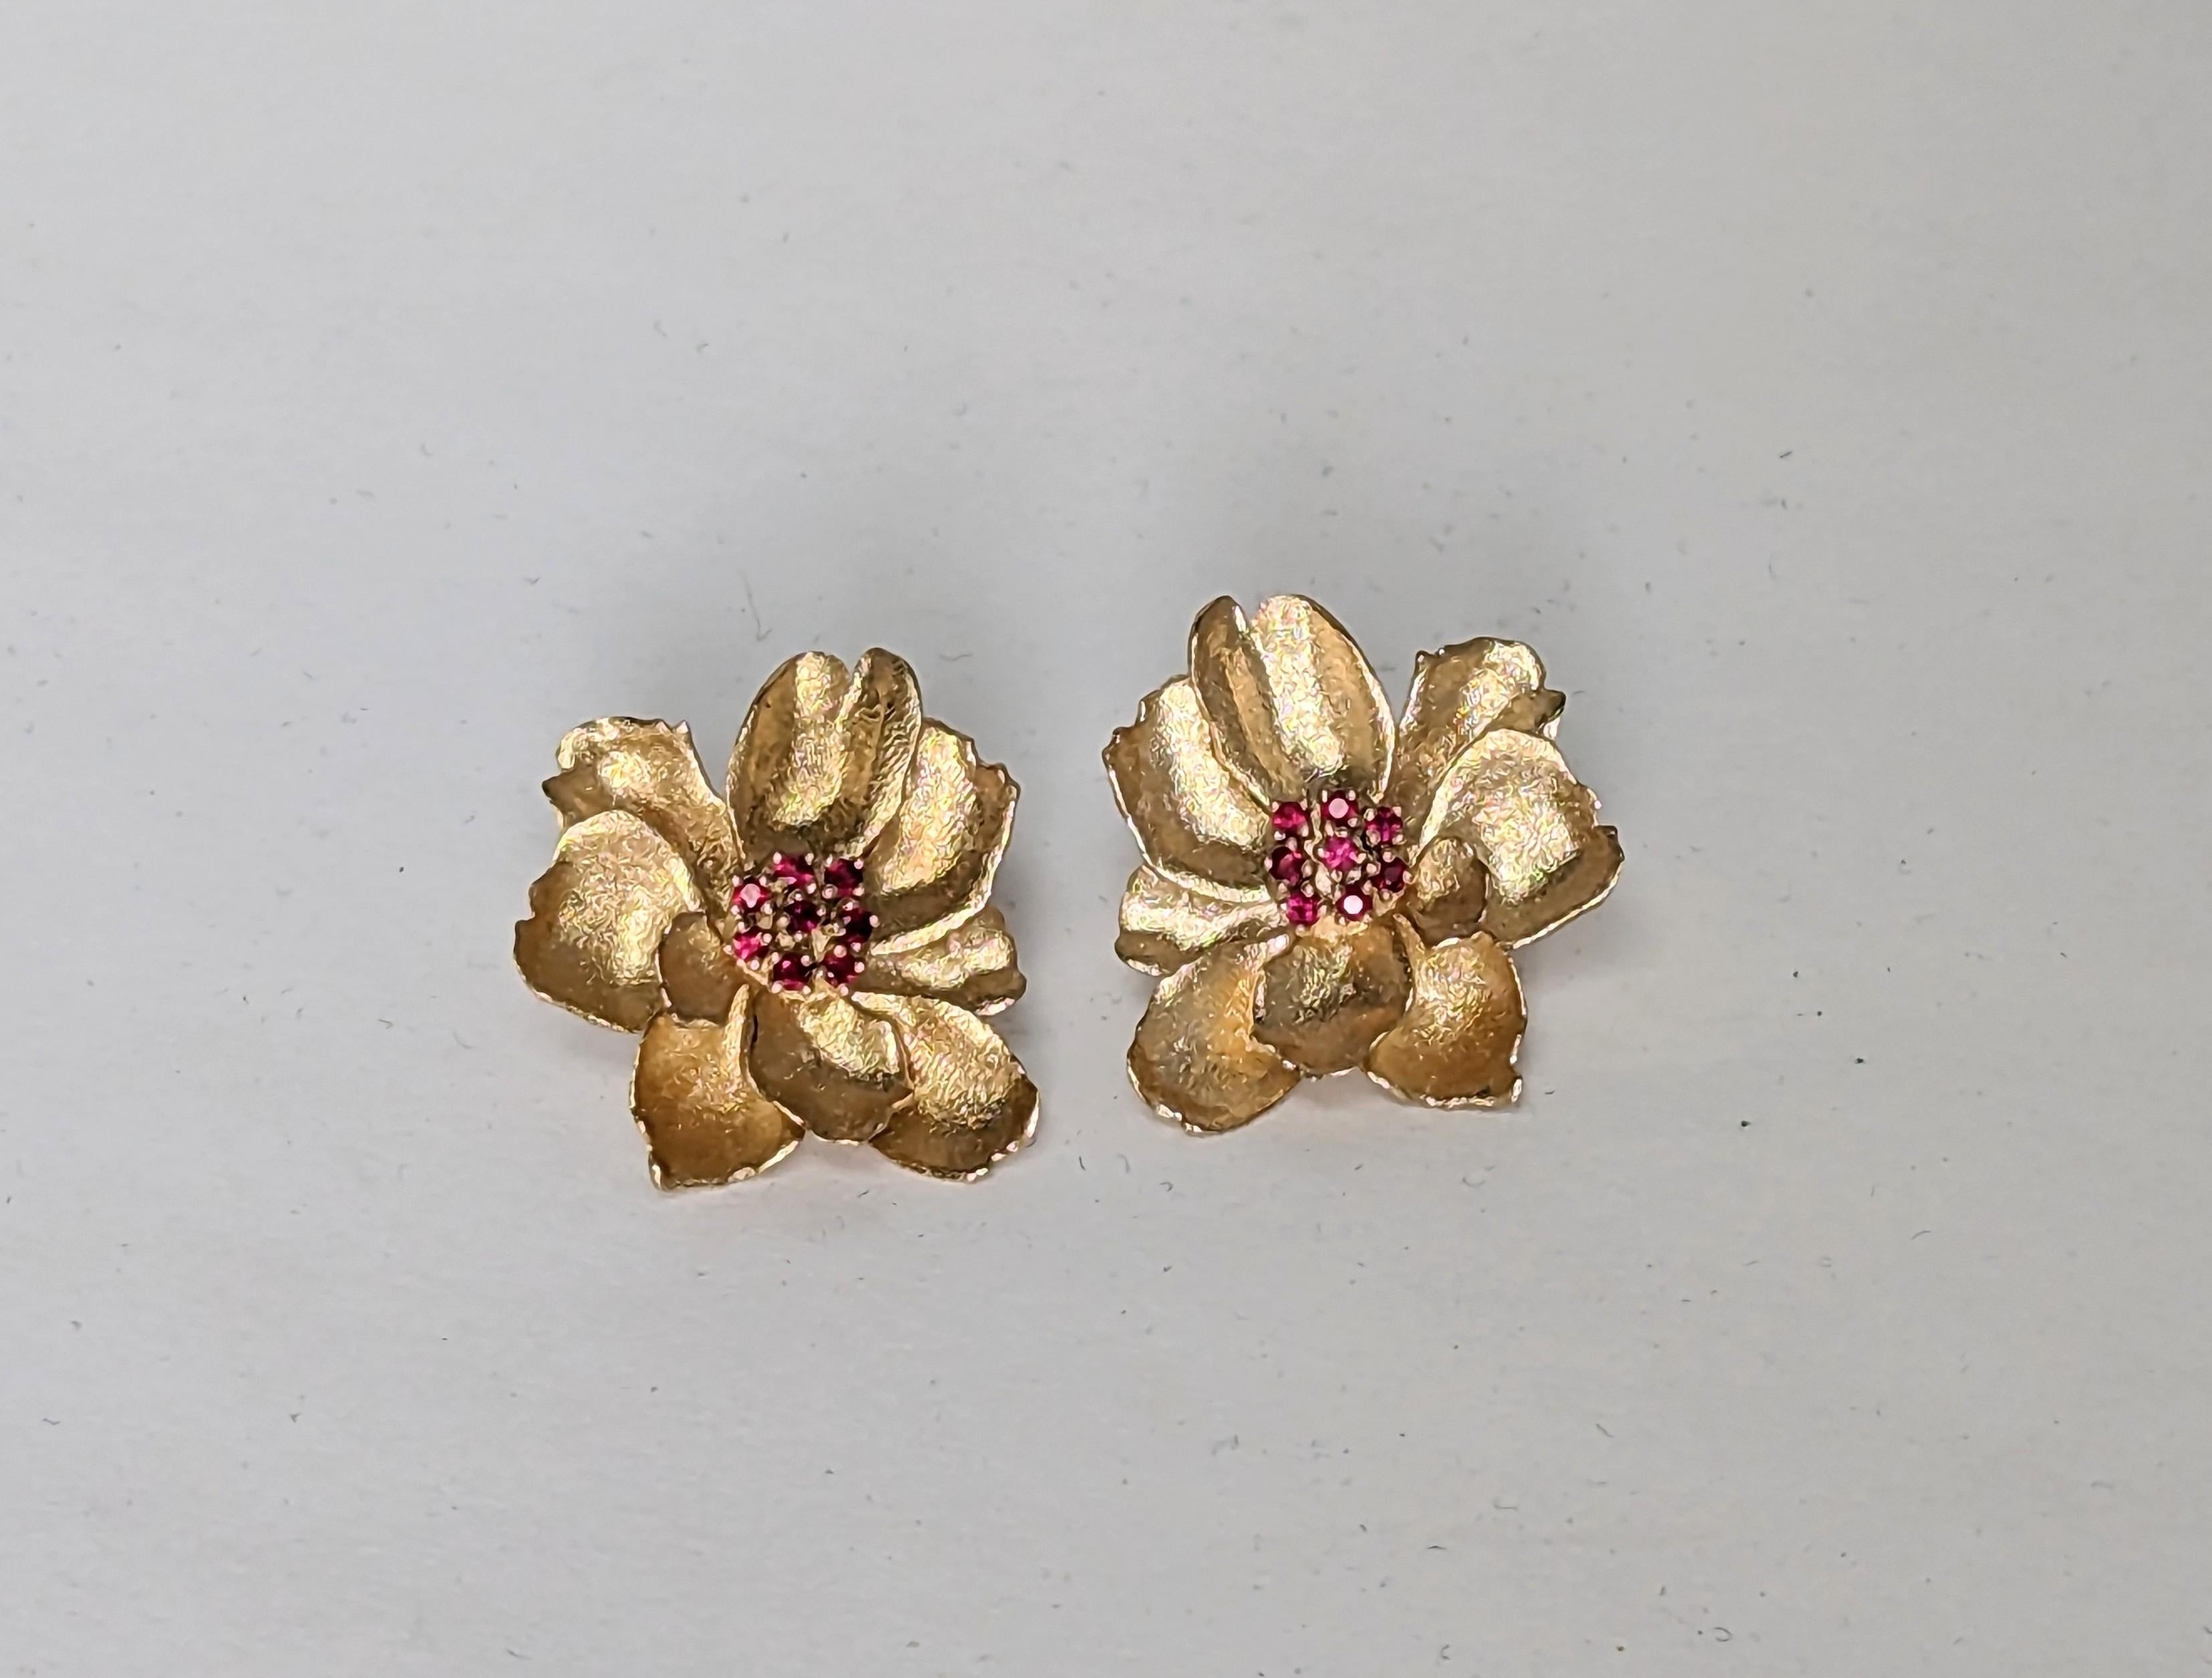 14 Karat Yellow Gold Wild Flower Earrings with Rubies For Sale 2